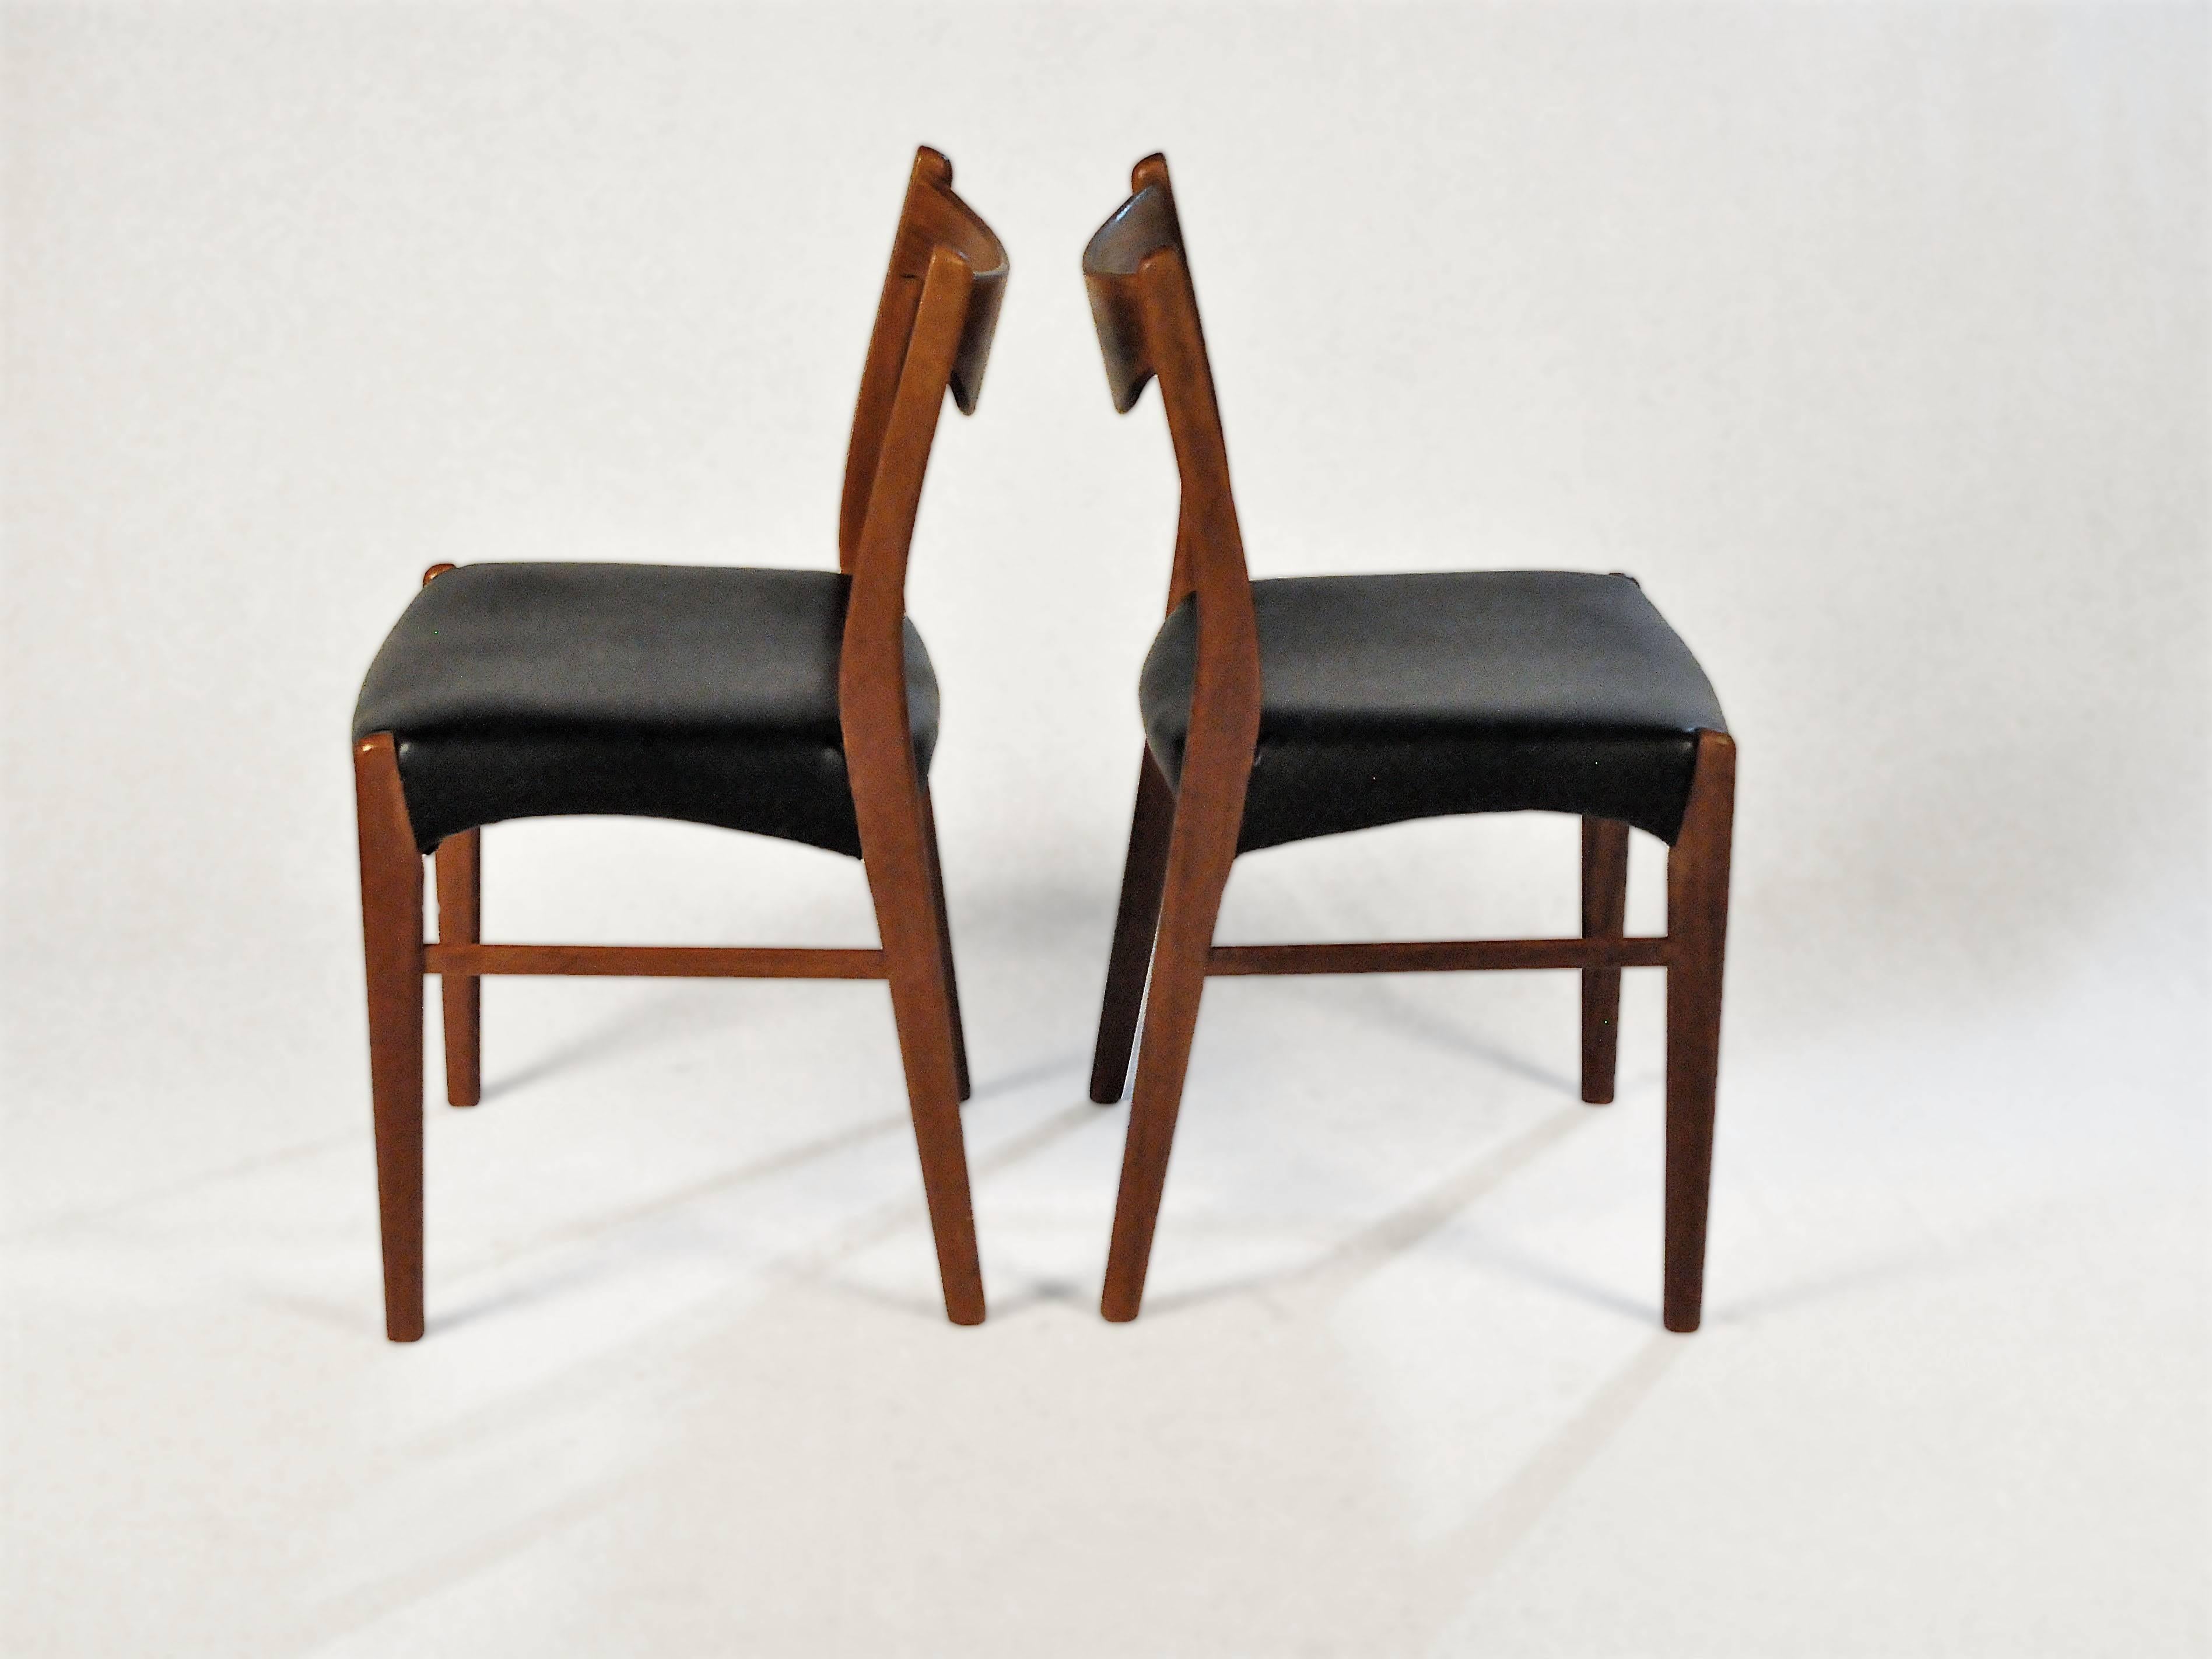 Two dining chairs in teak and leatherette designed by Ejnar Larsen and Axel Bender Madsen and produced by Glyngøre Stolefabrik in the 1960s

The dining chairs are in good condition and have a very streamlined modern flare to them with backrests